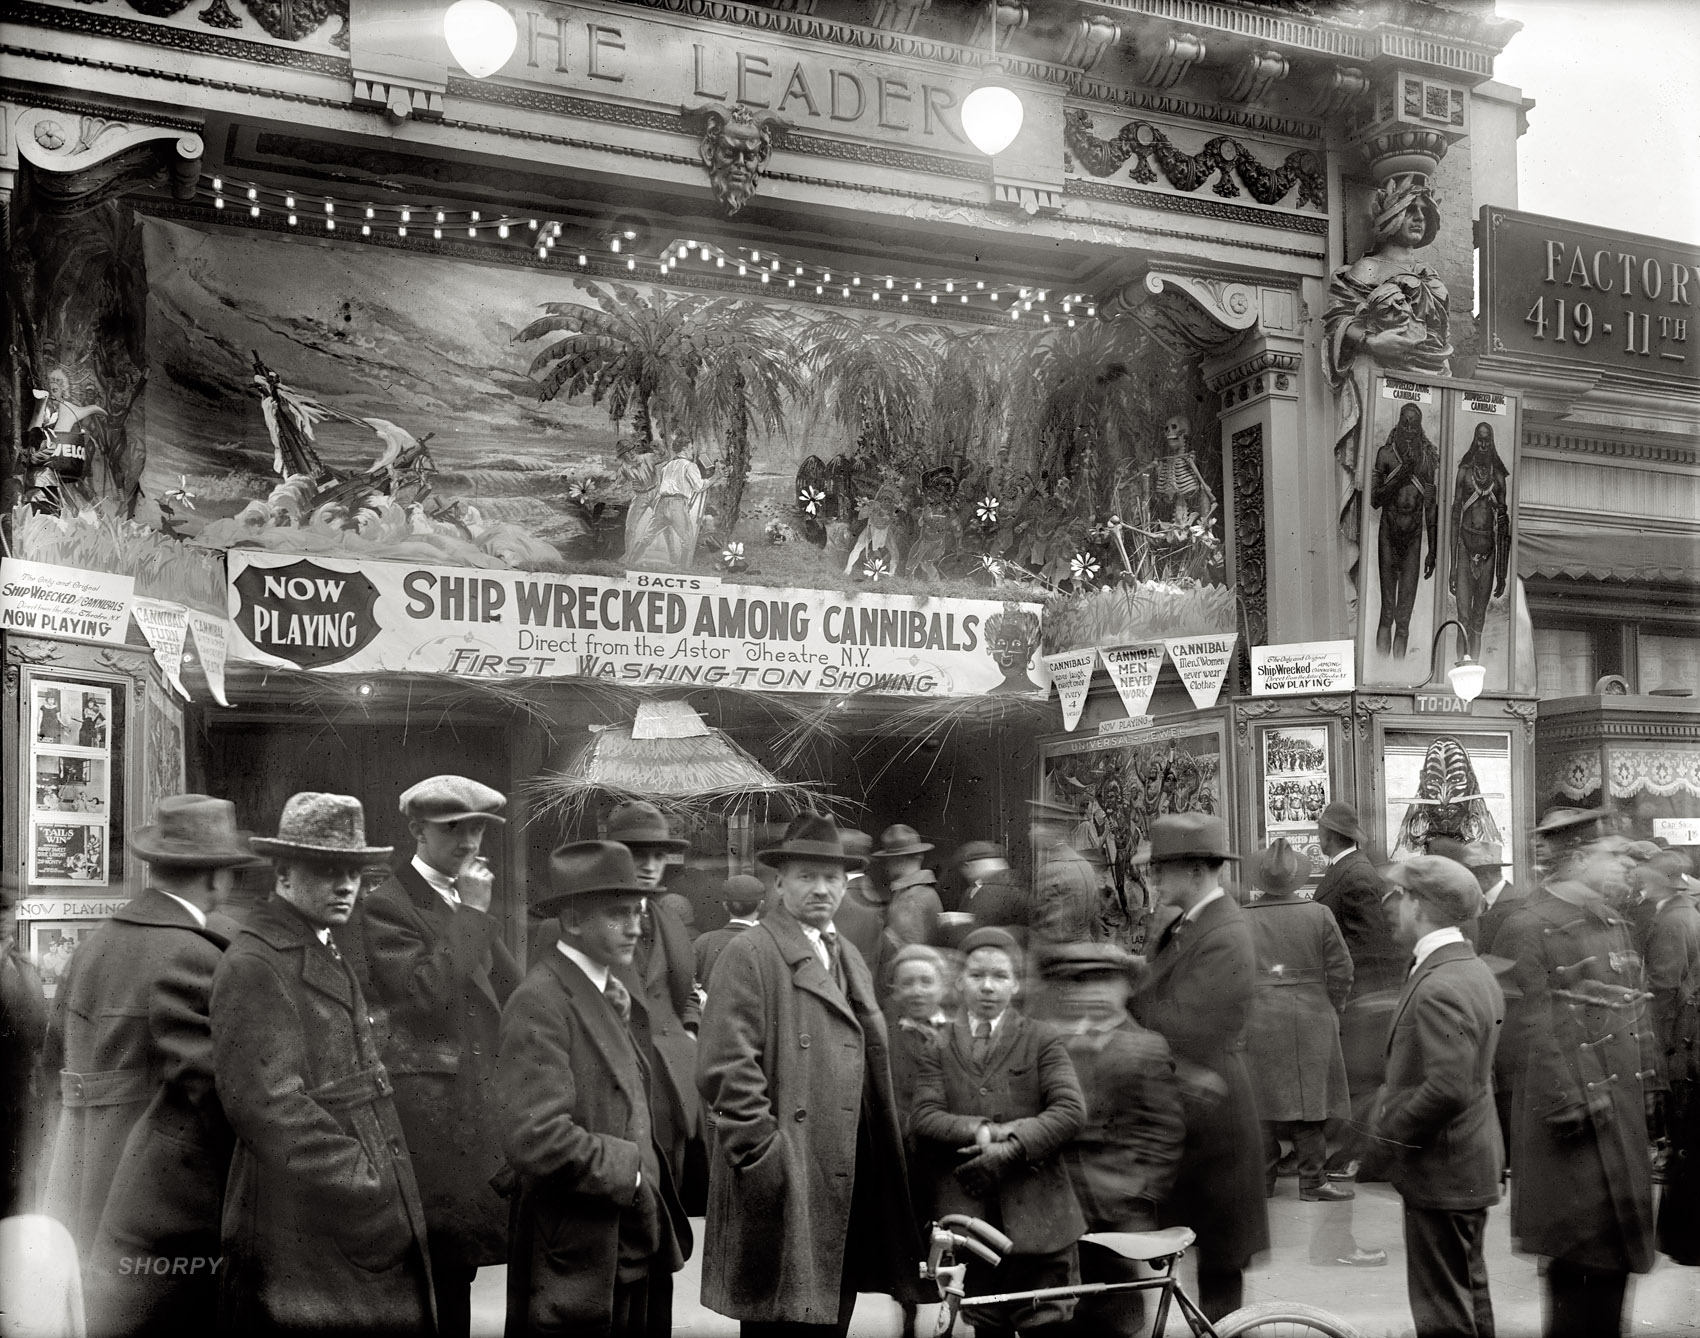 Washington, January 1921. Now playing at the Leader: "Shipwrecked Among Cannibals." Just loitering outside for a few minutes is practically a graduate course in cannibal lore. View full size. National Photo Company glass negative.